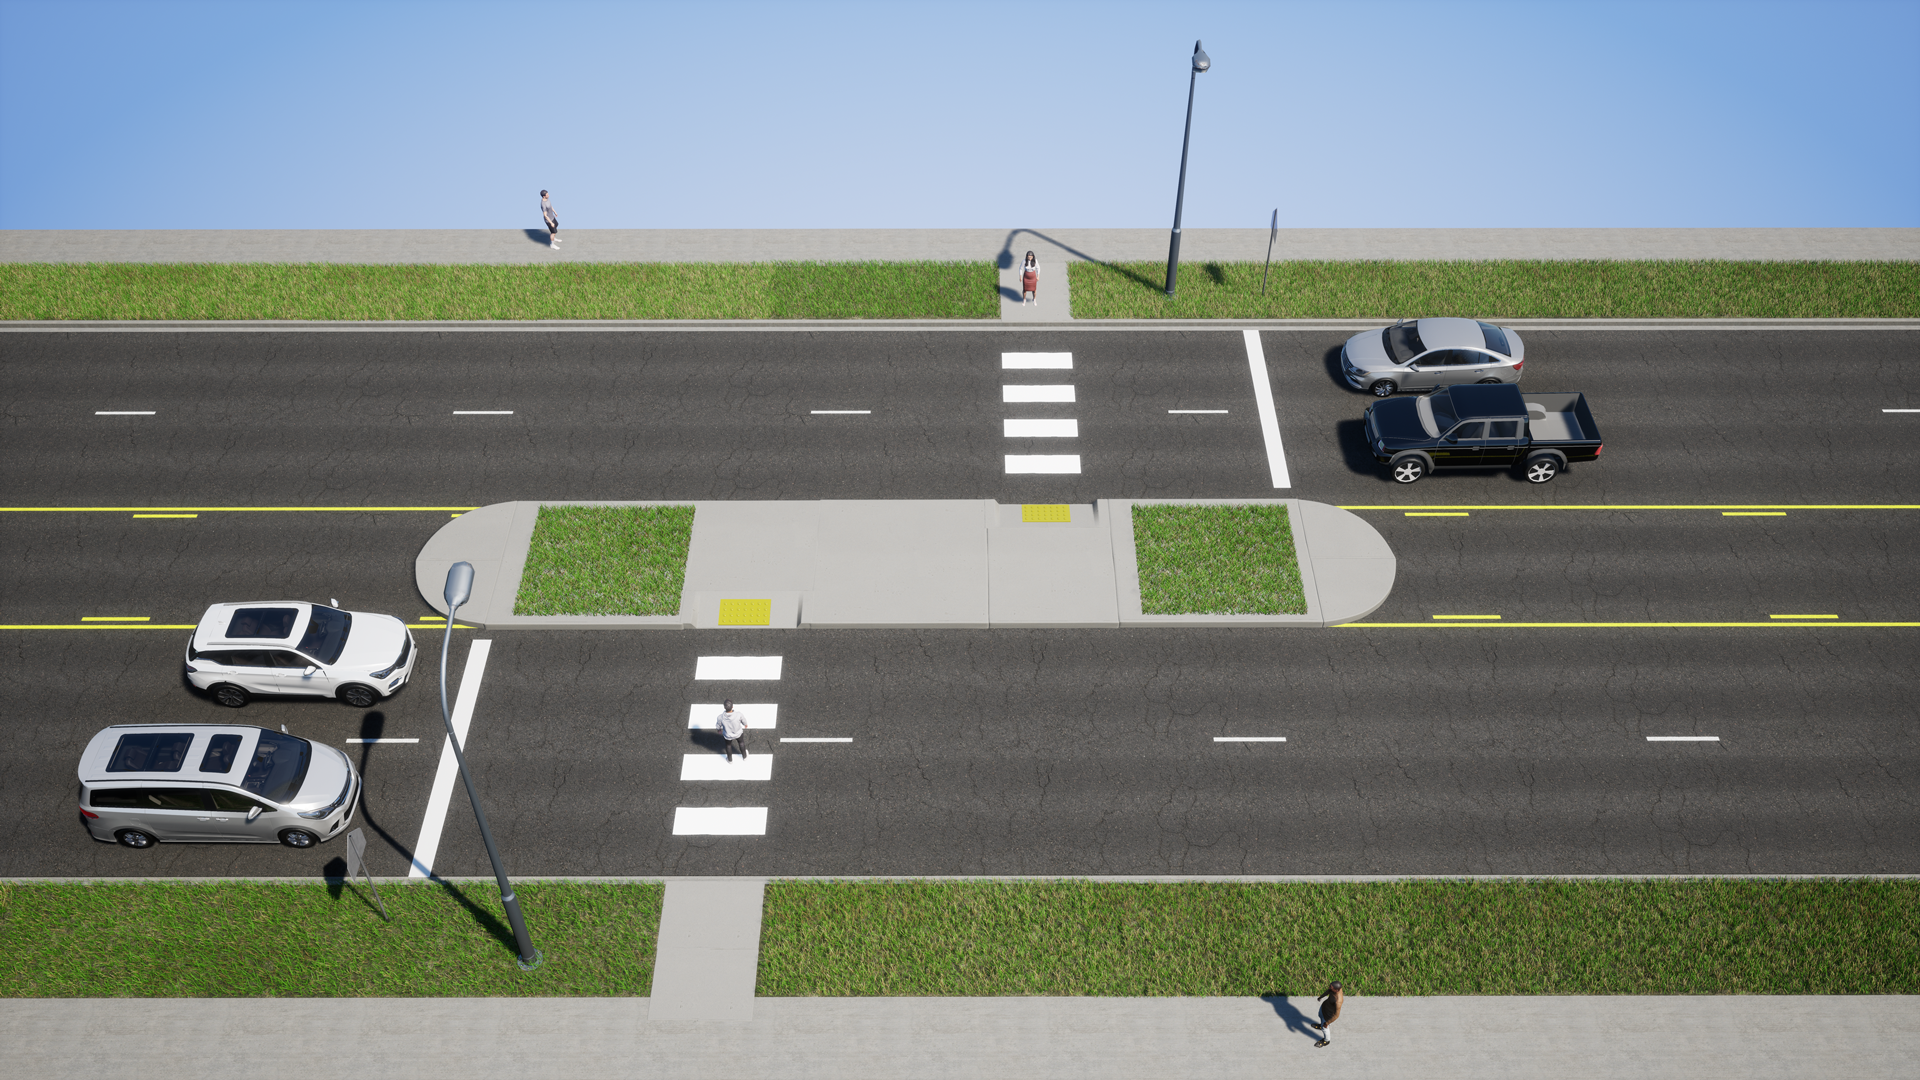 Example of a Z-path pedestrian crossing with a center median